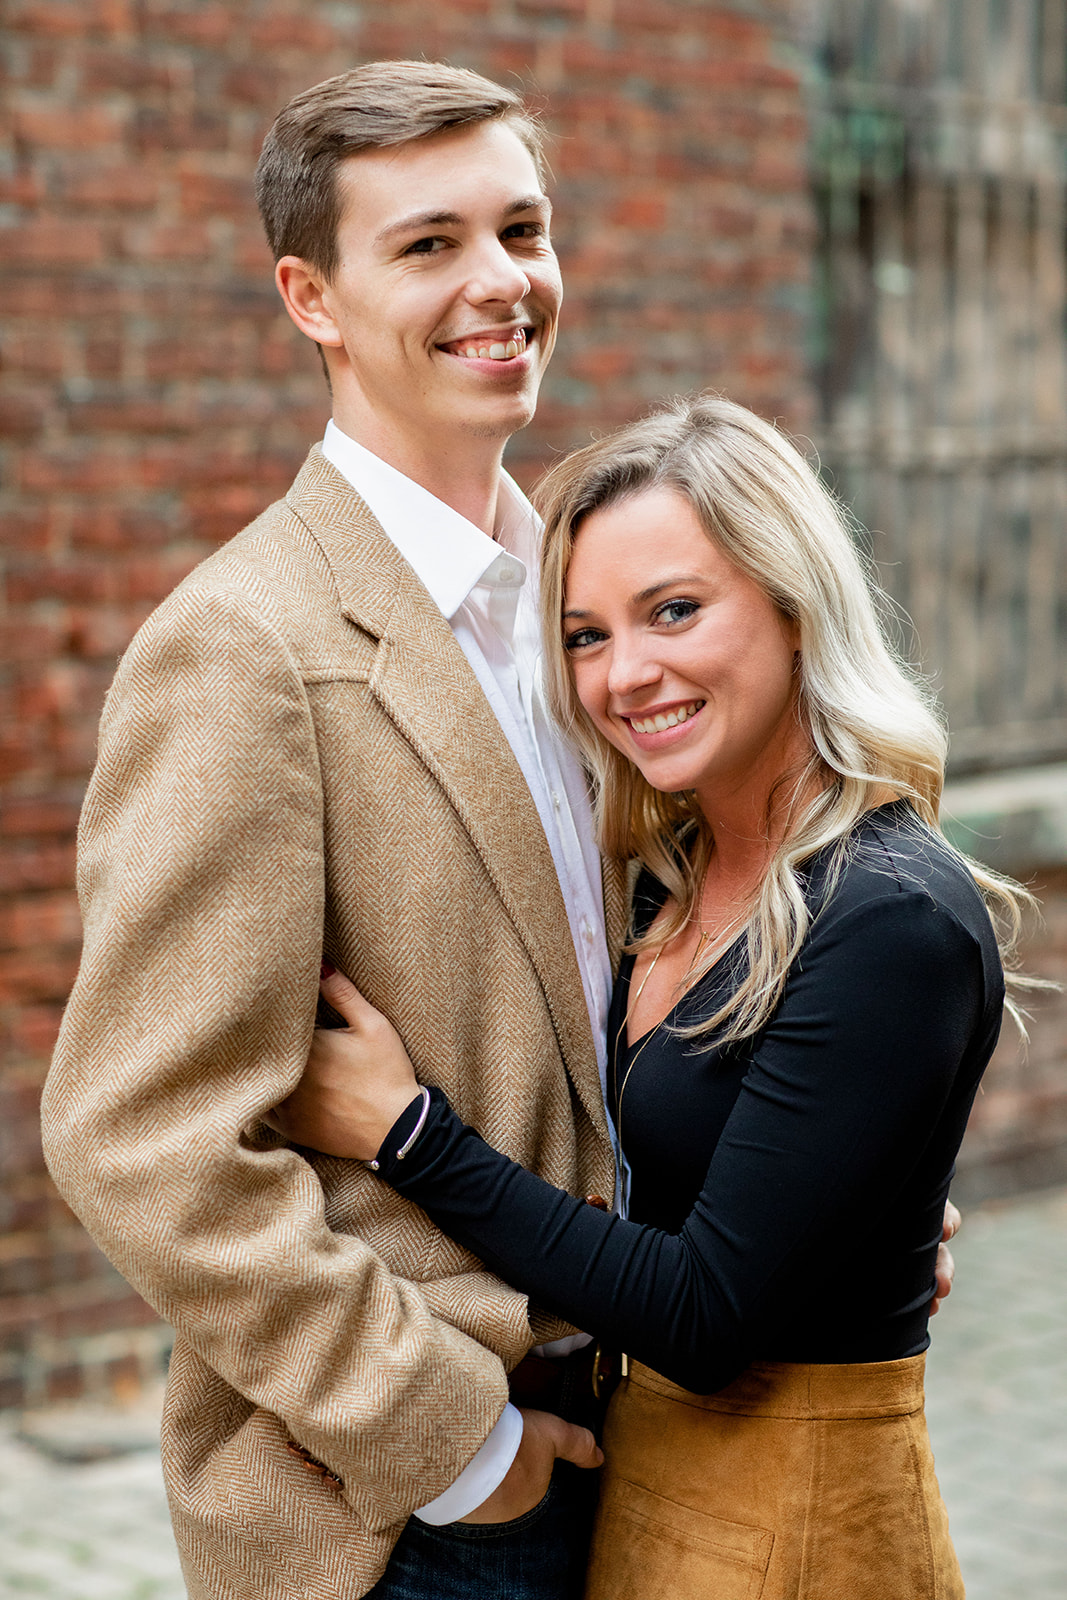 Ally  Austins Maymont and Tobacco Company Engagement Shoot - Image Property of www.j-dphoto.com